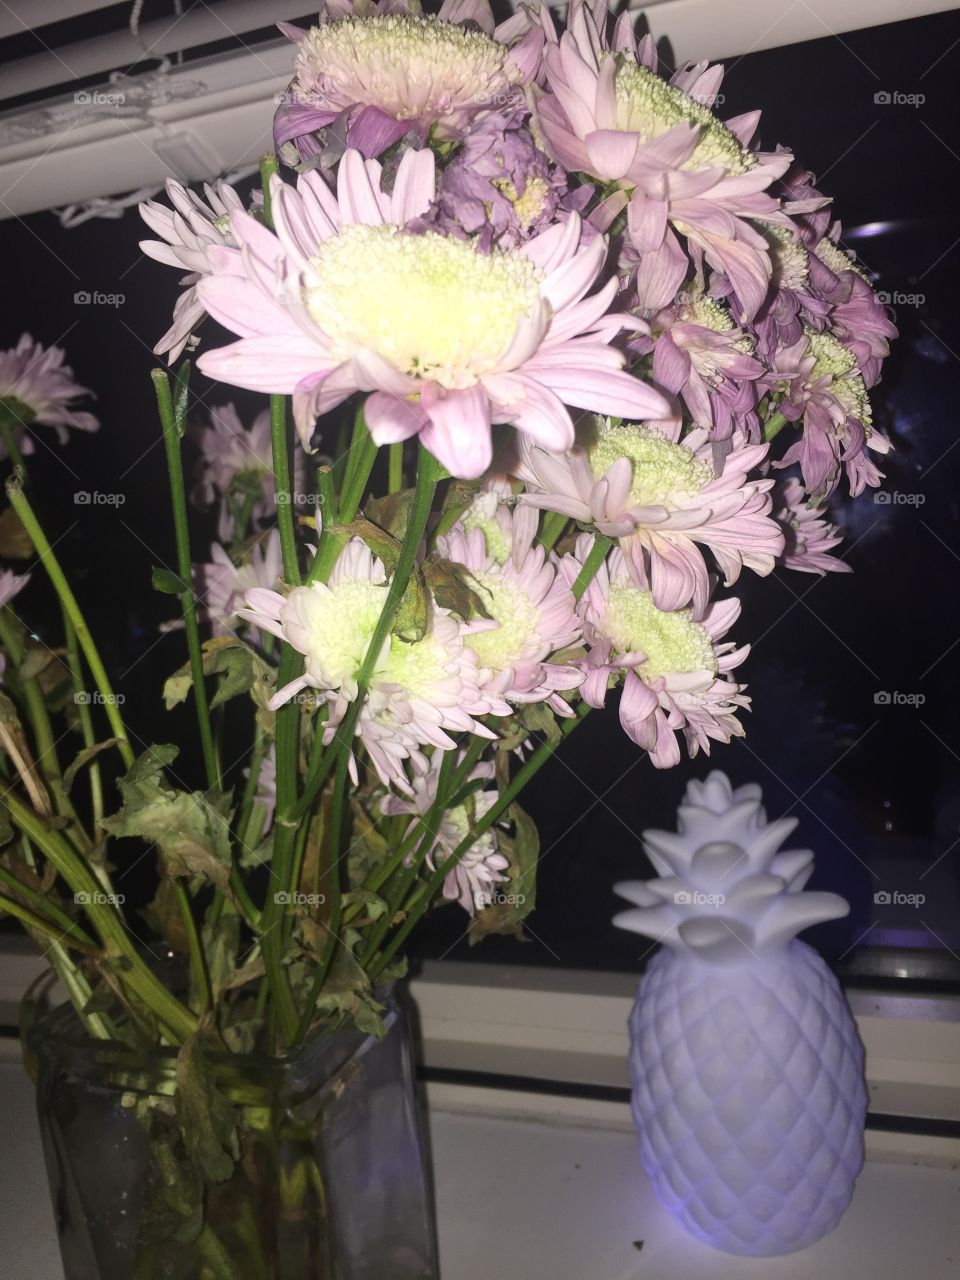 The flowers were an International Women’s day gift and the pinneapple in the background lights up! Dorm decorations at their finest!